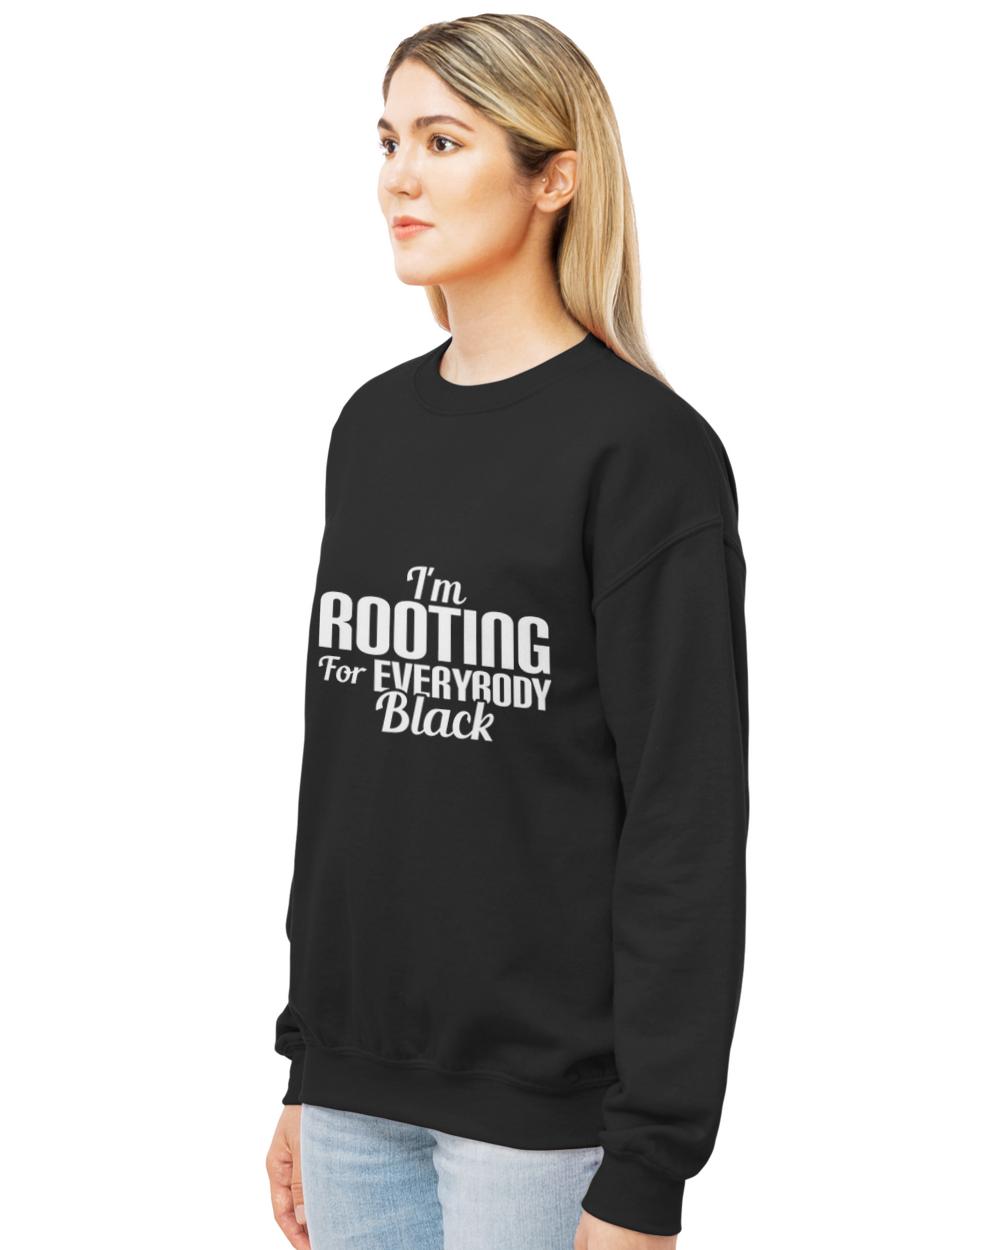 Nice im rooting for everybody black  funny cool t-shirt